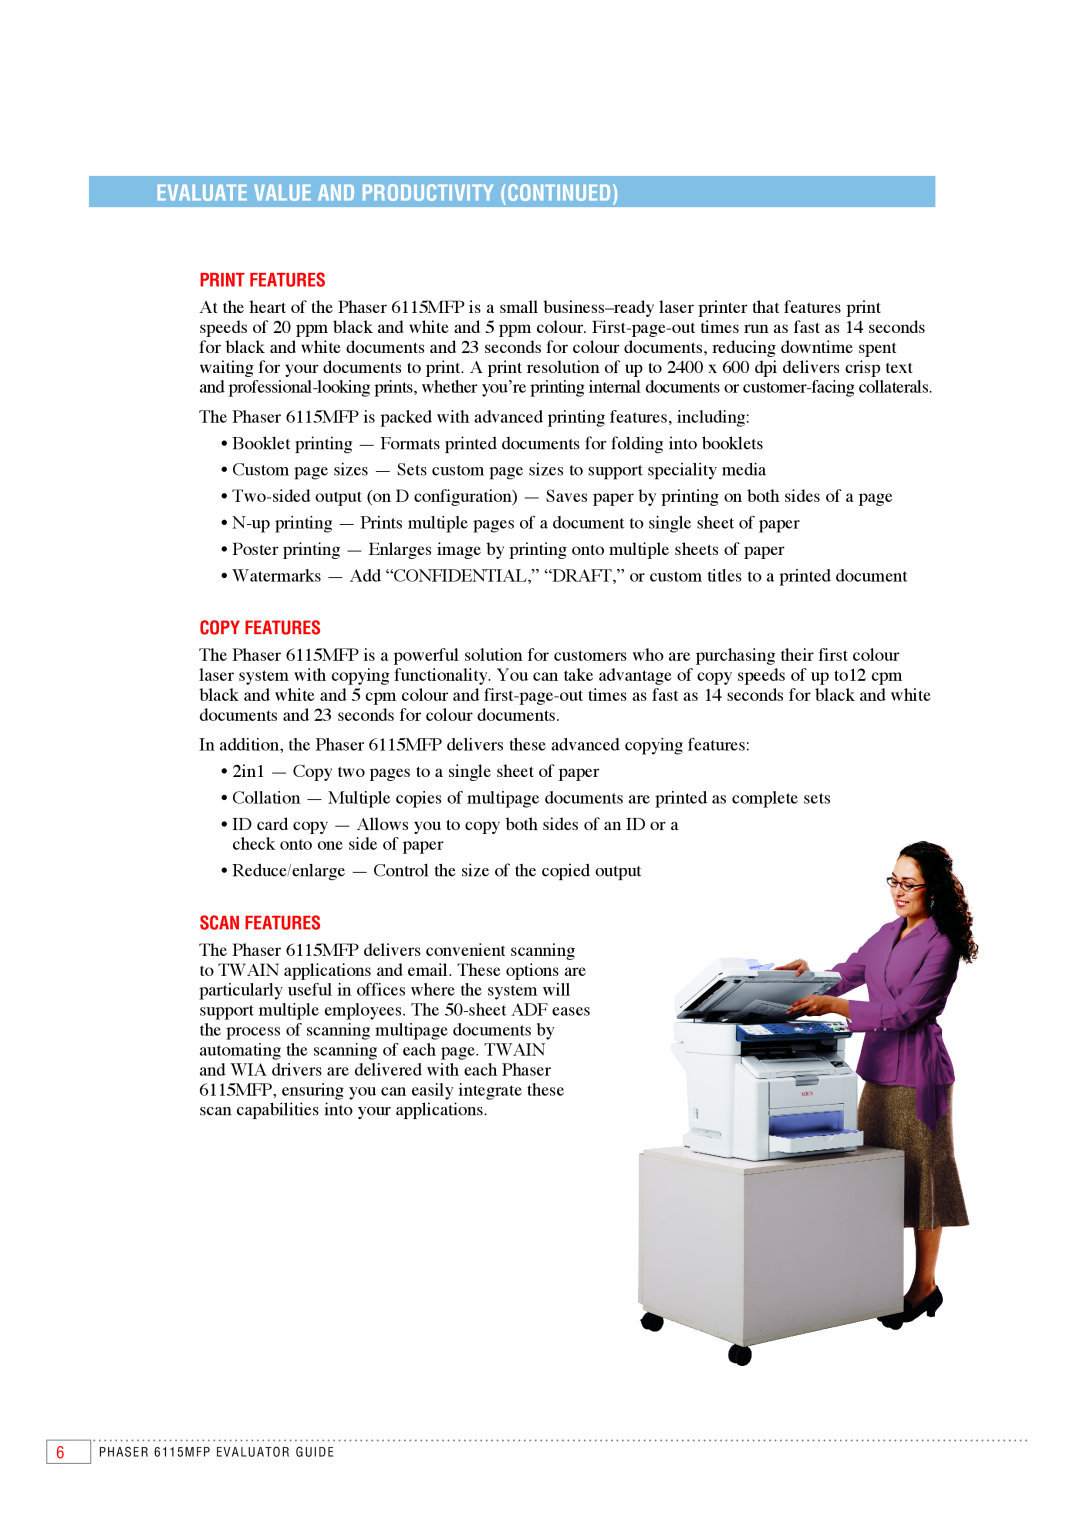 Xerox 6115MFP manual Evaluate Value And Productivity Continued, Print Features, Copy Features, Scan Features 